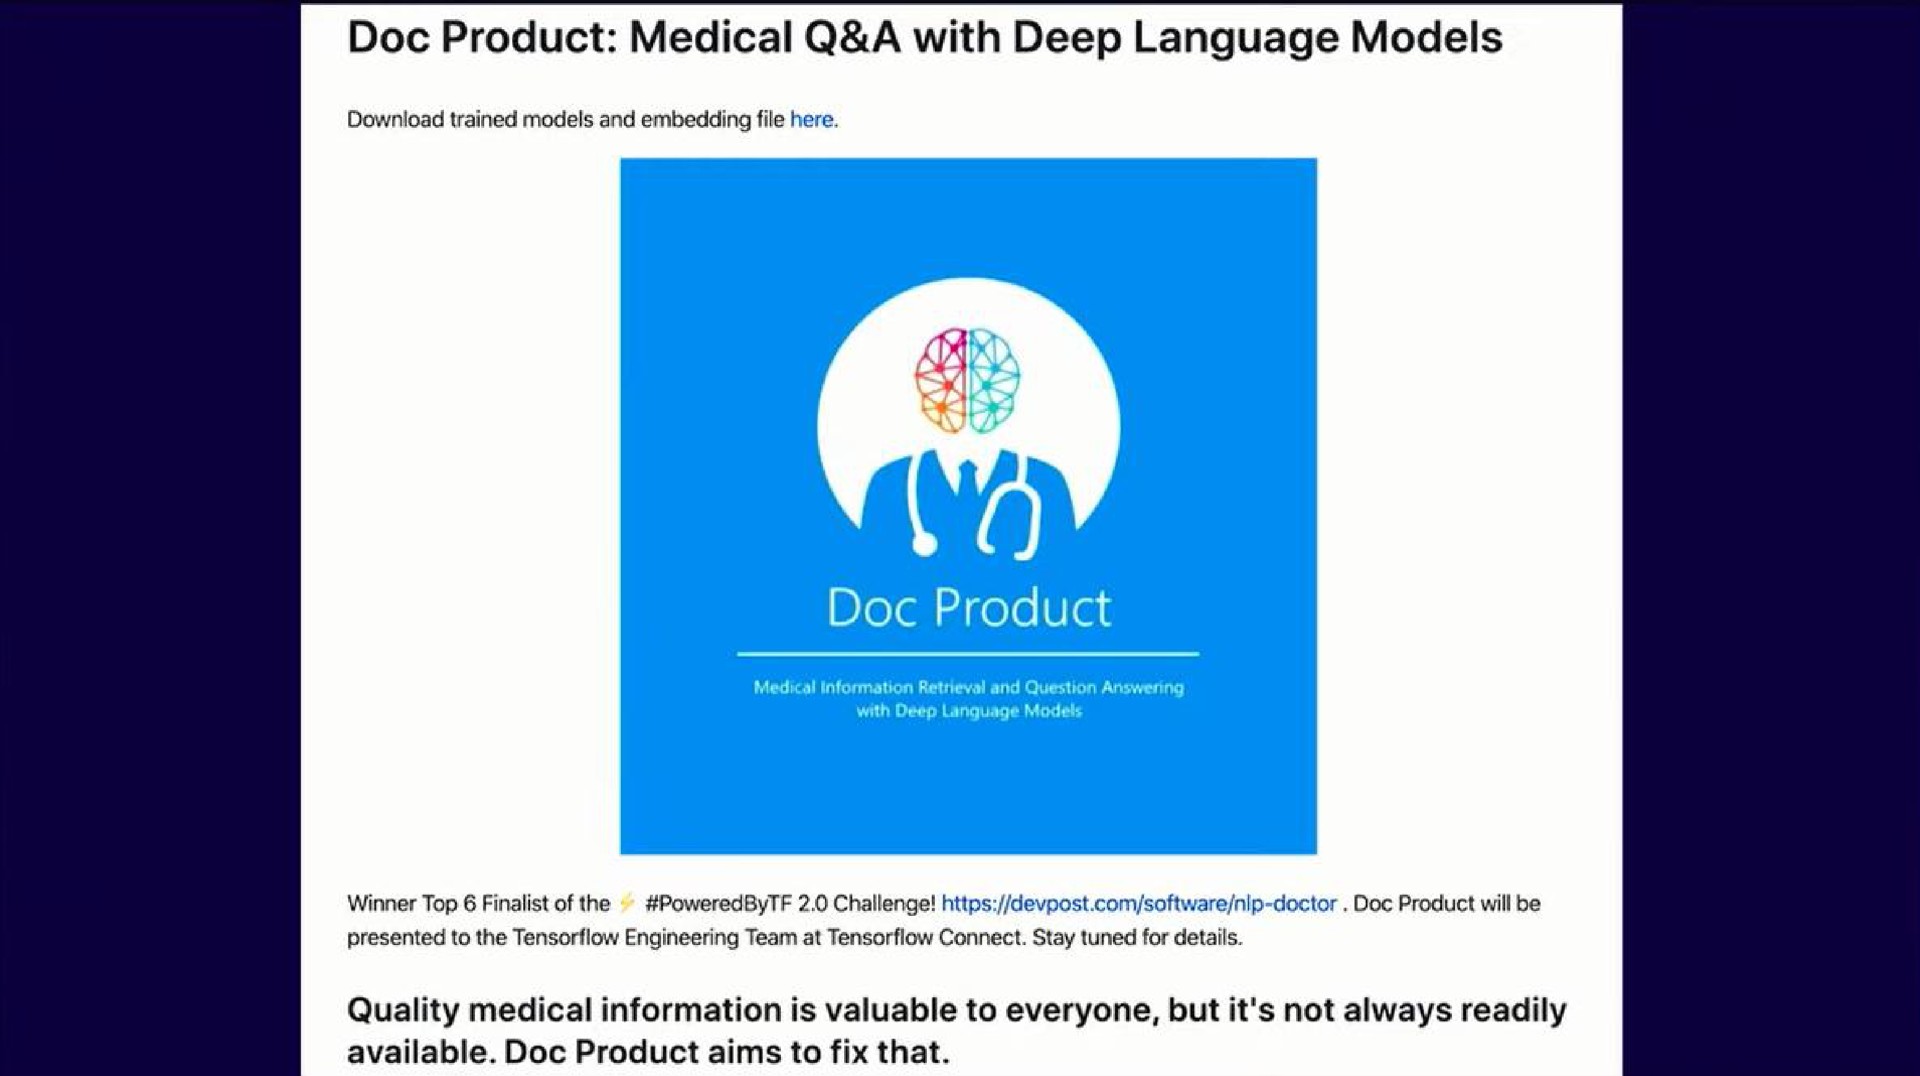 doc product medical a with deep language models doc product | OpenAI